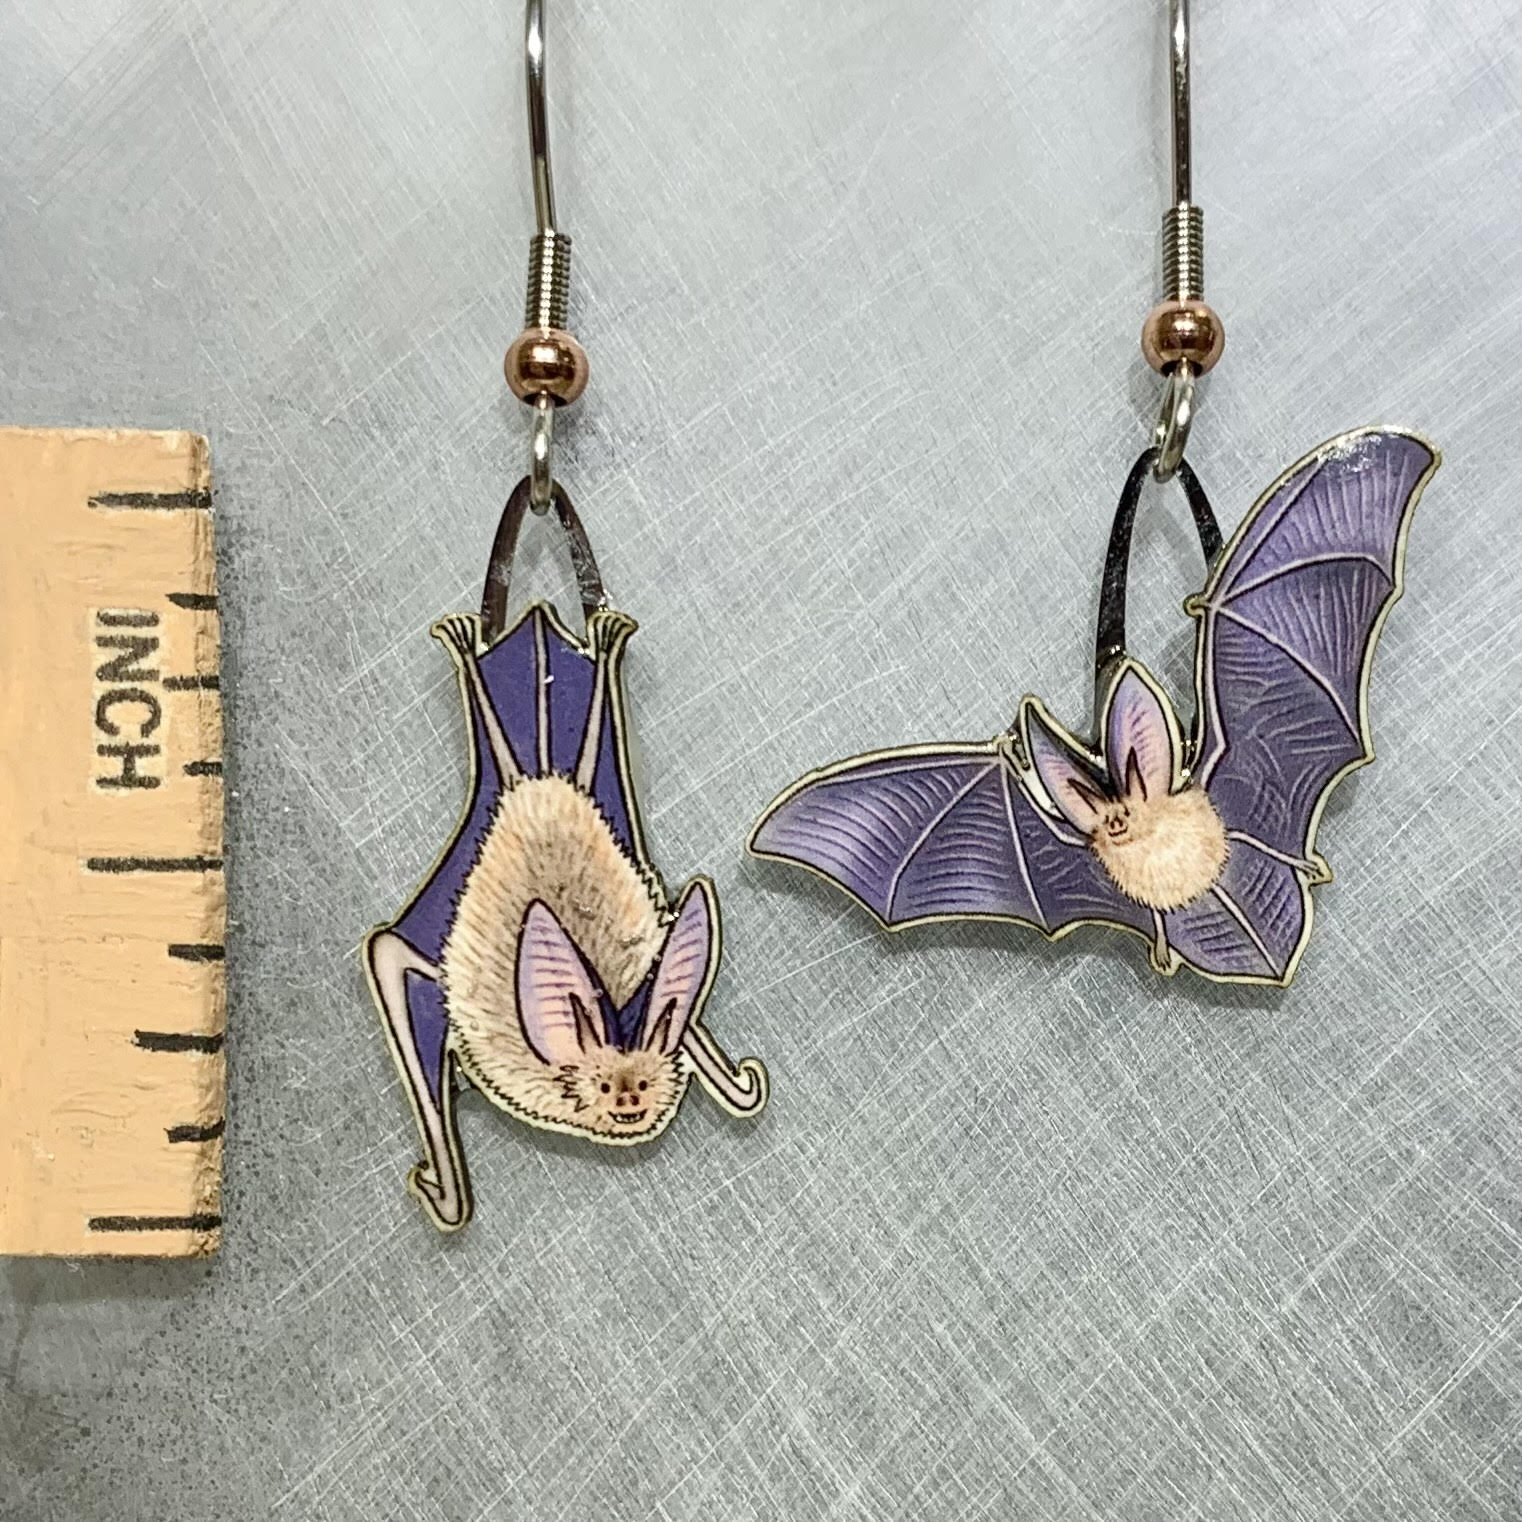 Picture shown is of 1 inch tall pair of earrings of the animal the Big-eared Bat.